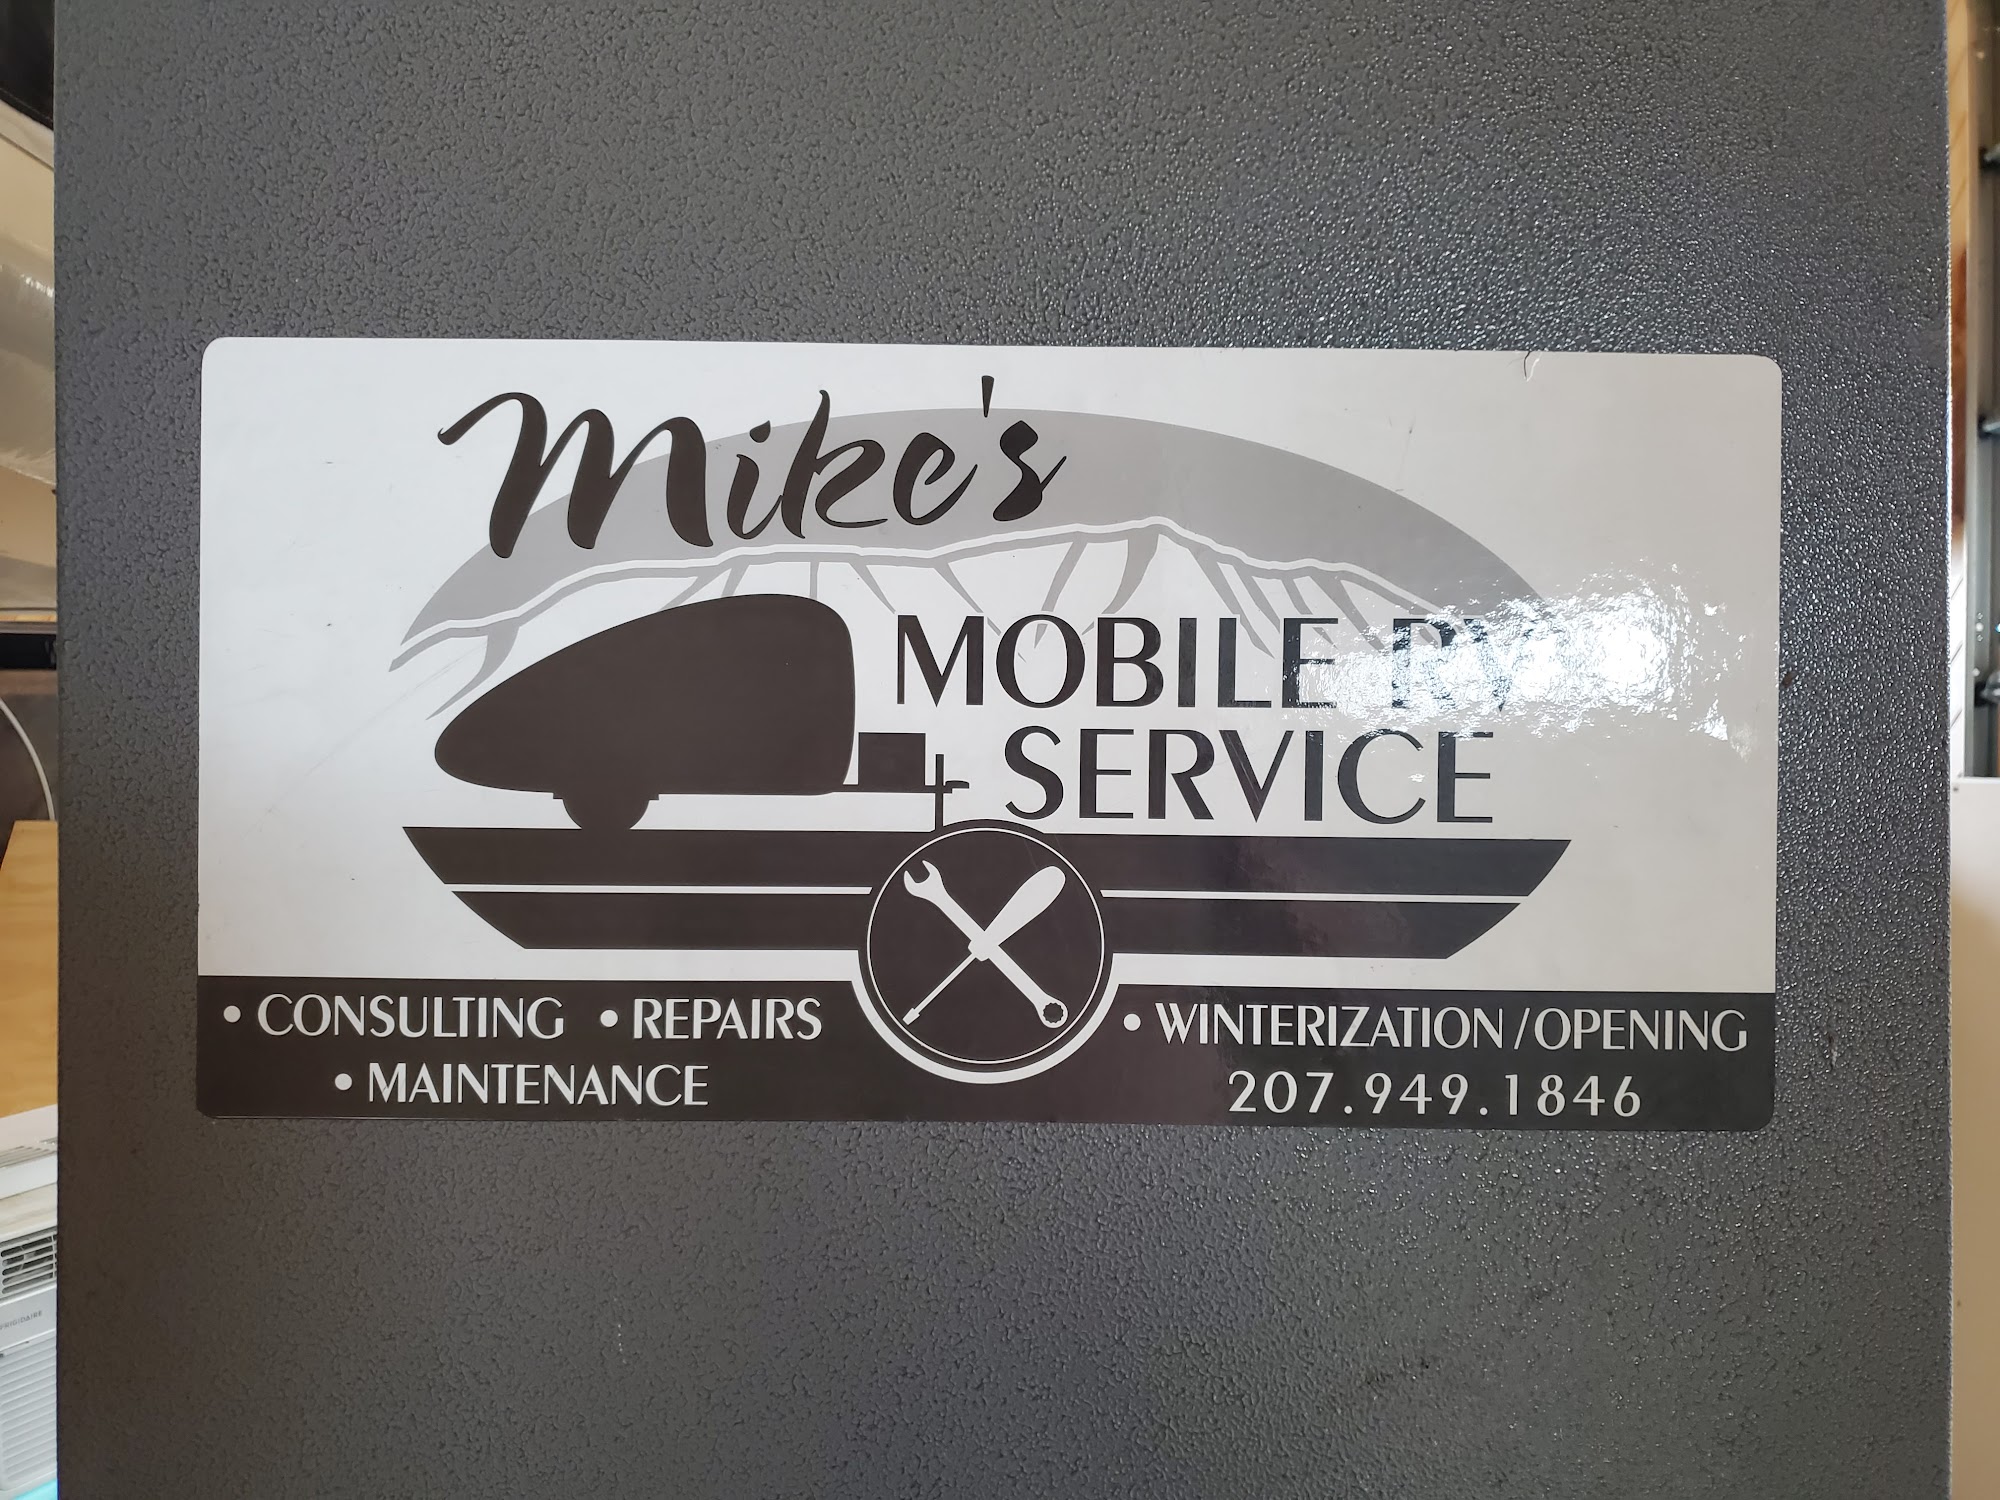 Mike's Mobile RV Service 26 Nickerson Hill Rd, Clifton Maine 04428